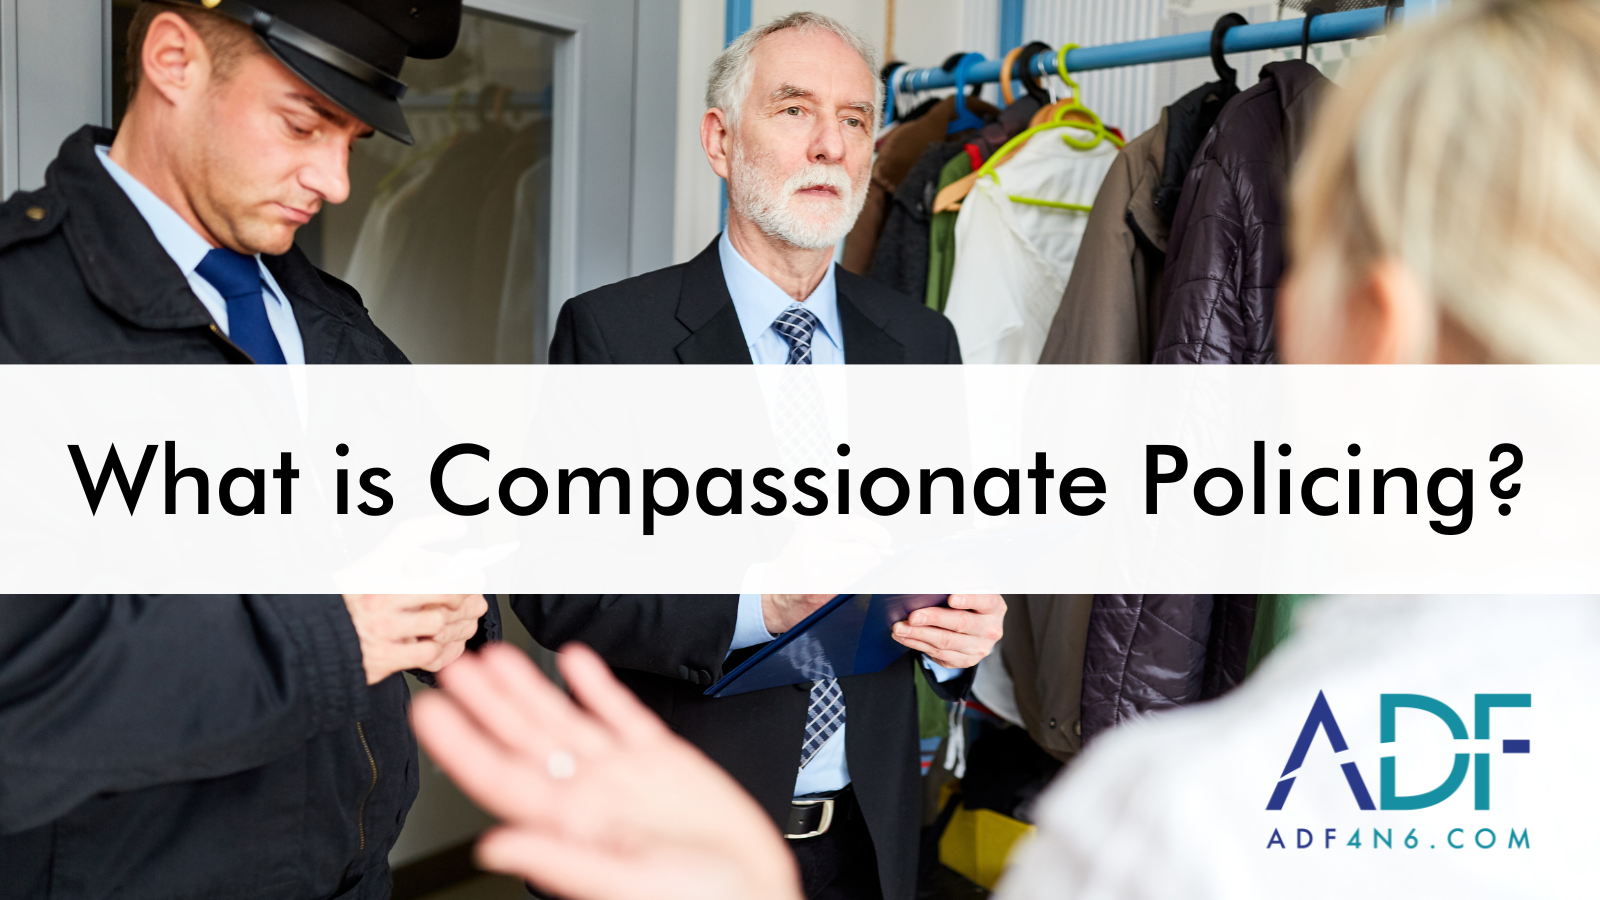 What is Compassionate Policing?